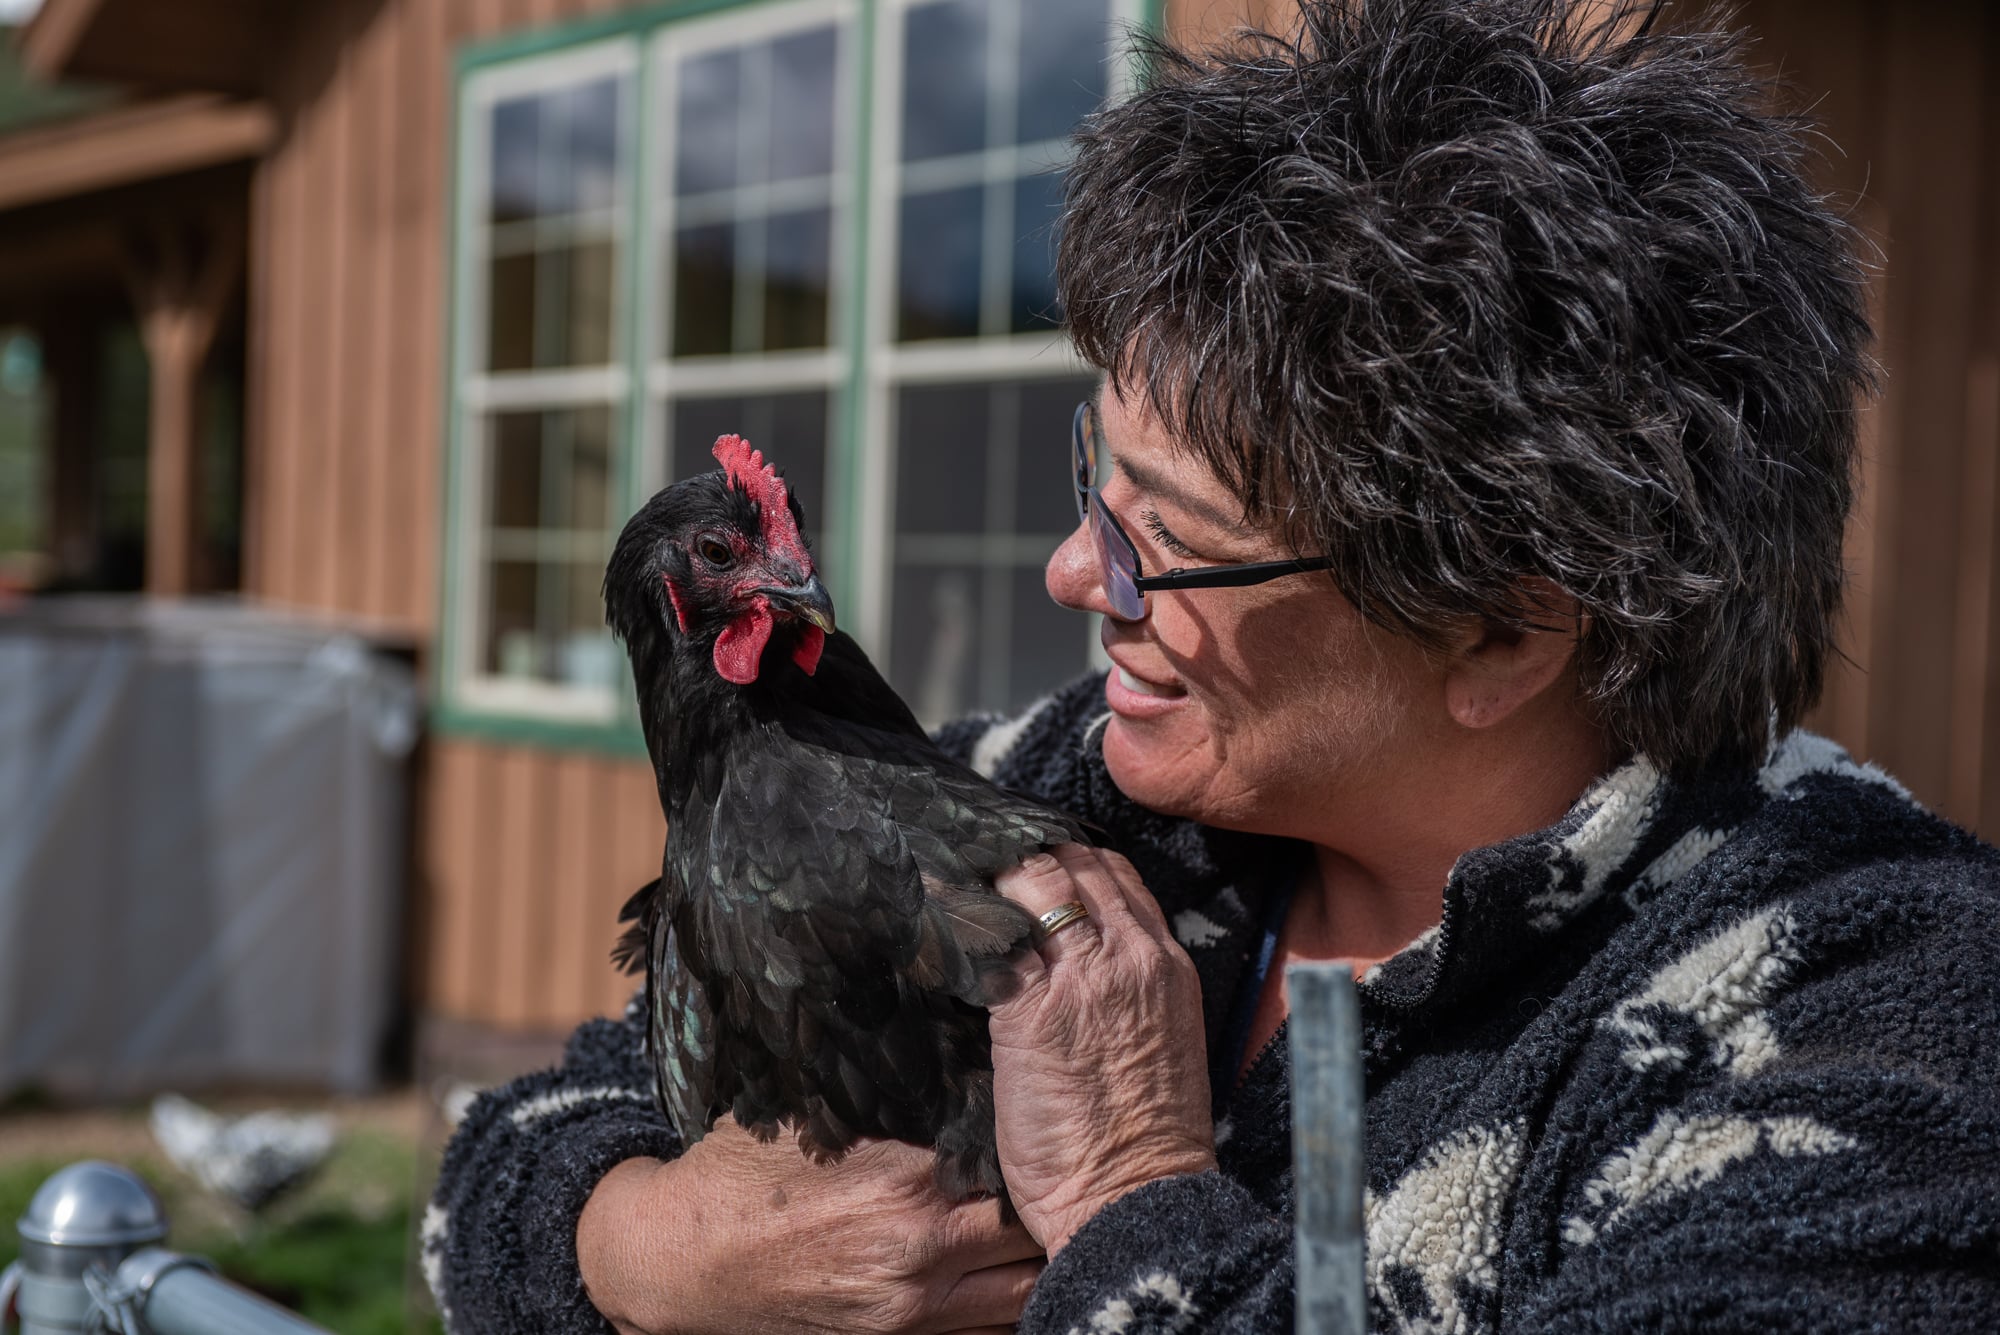 Andrea “Andie” Sramek and her chicken, Alice, survived the Roosevelt Fire unscathed, spared by a shift in the wind and a pond near her home. “All my friends, people I love, their homes are gone,” said Sramek. (Dustin Patar/News21)